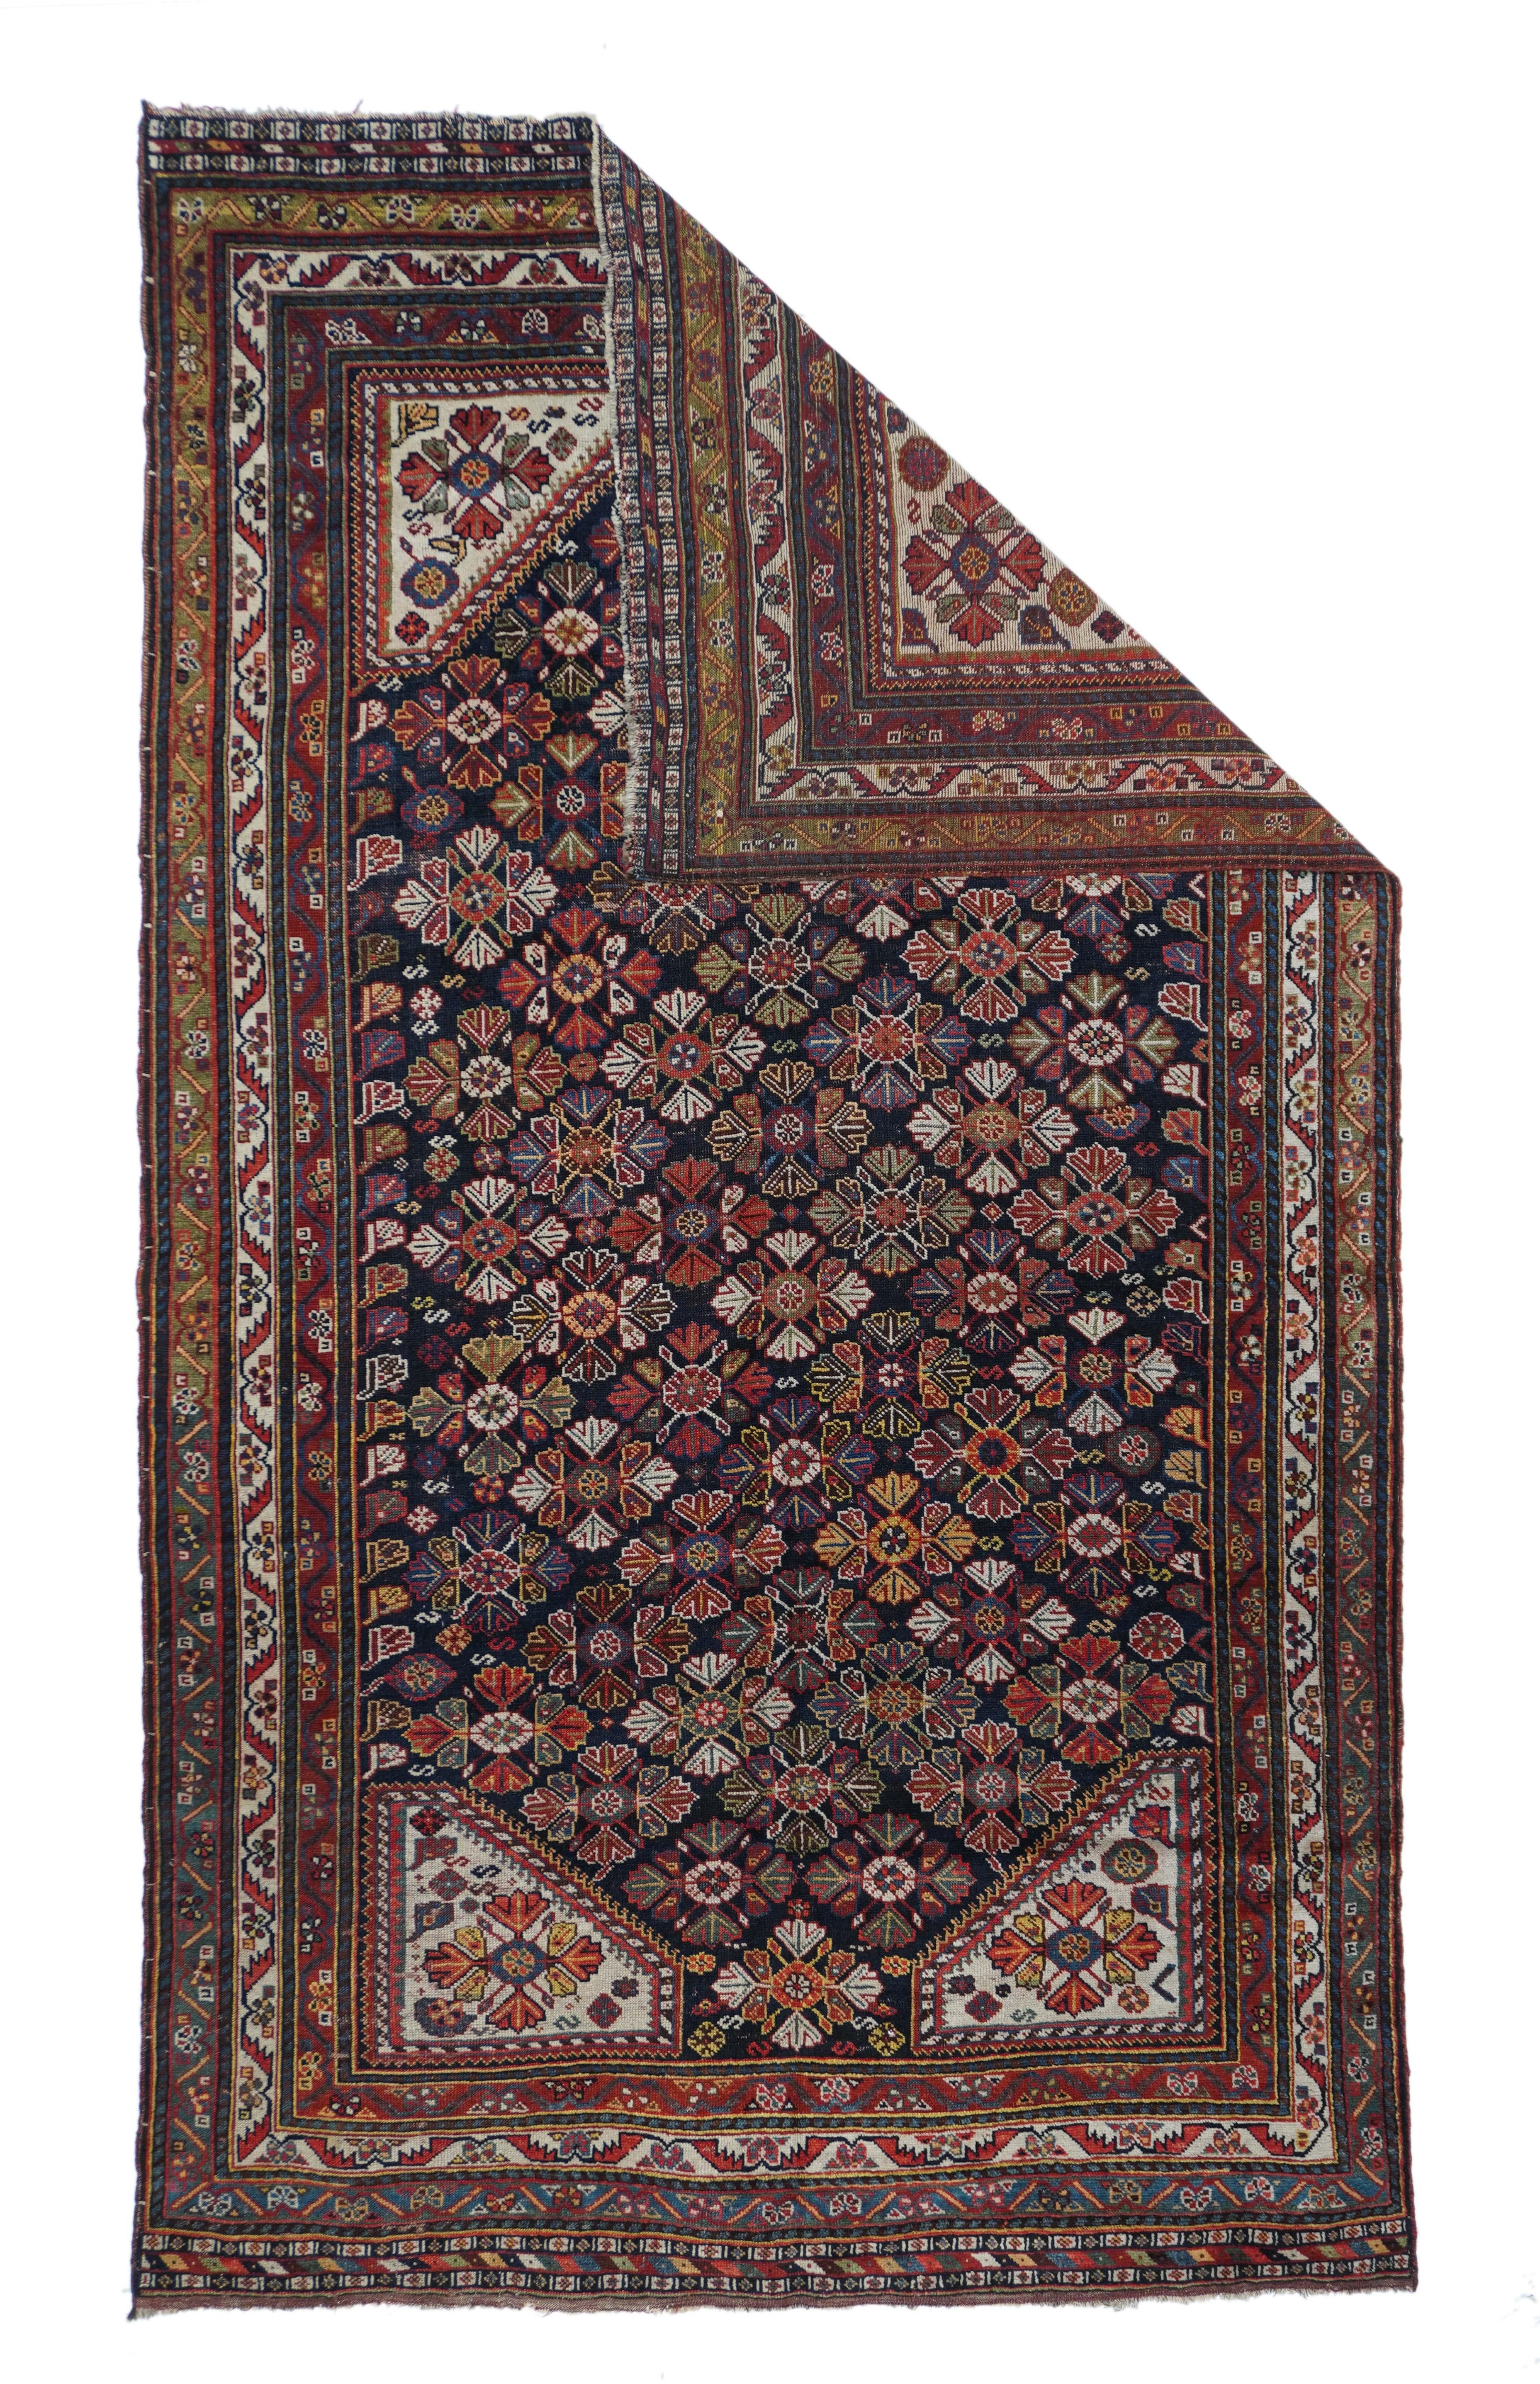 This modern western Turkish town carpet features a five column design of tilted palmettes, symmetrized ragged palmettes and little florets, all accenting a lozenge lattice on a light green field. Green border with palmettes, red slit meander, and